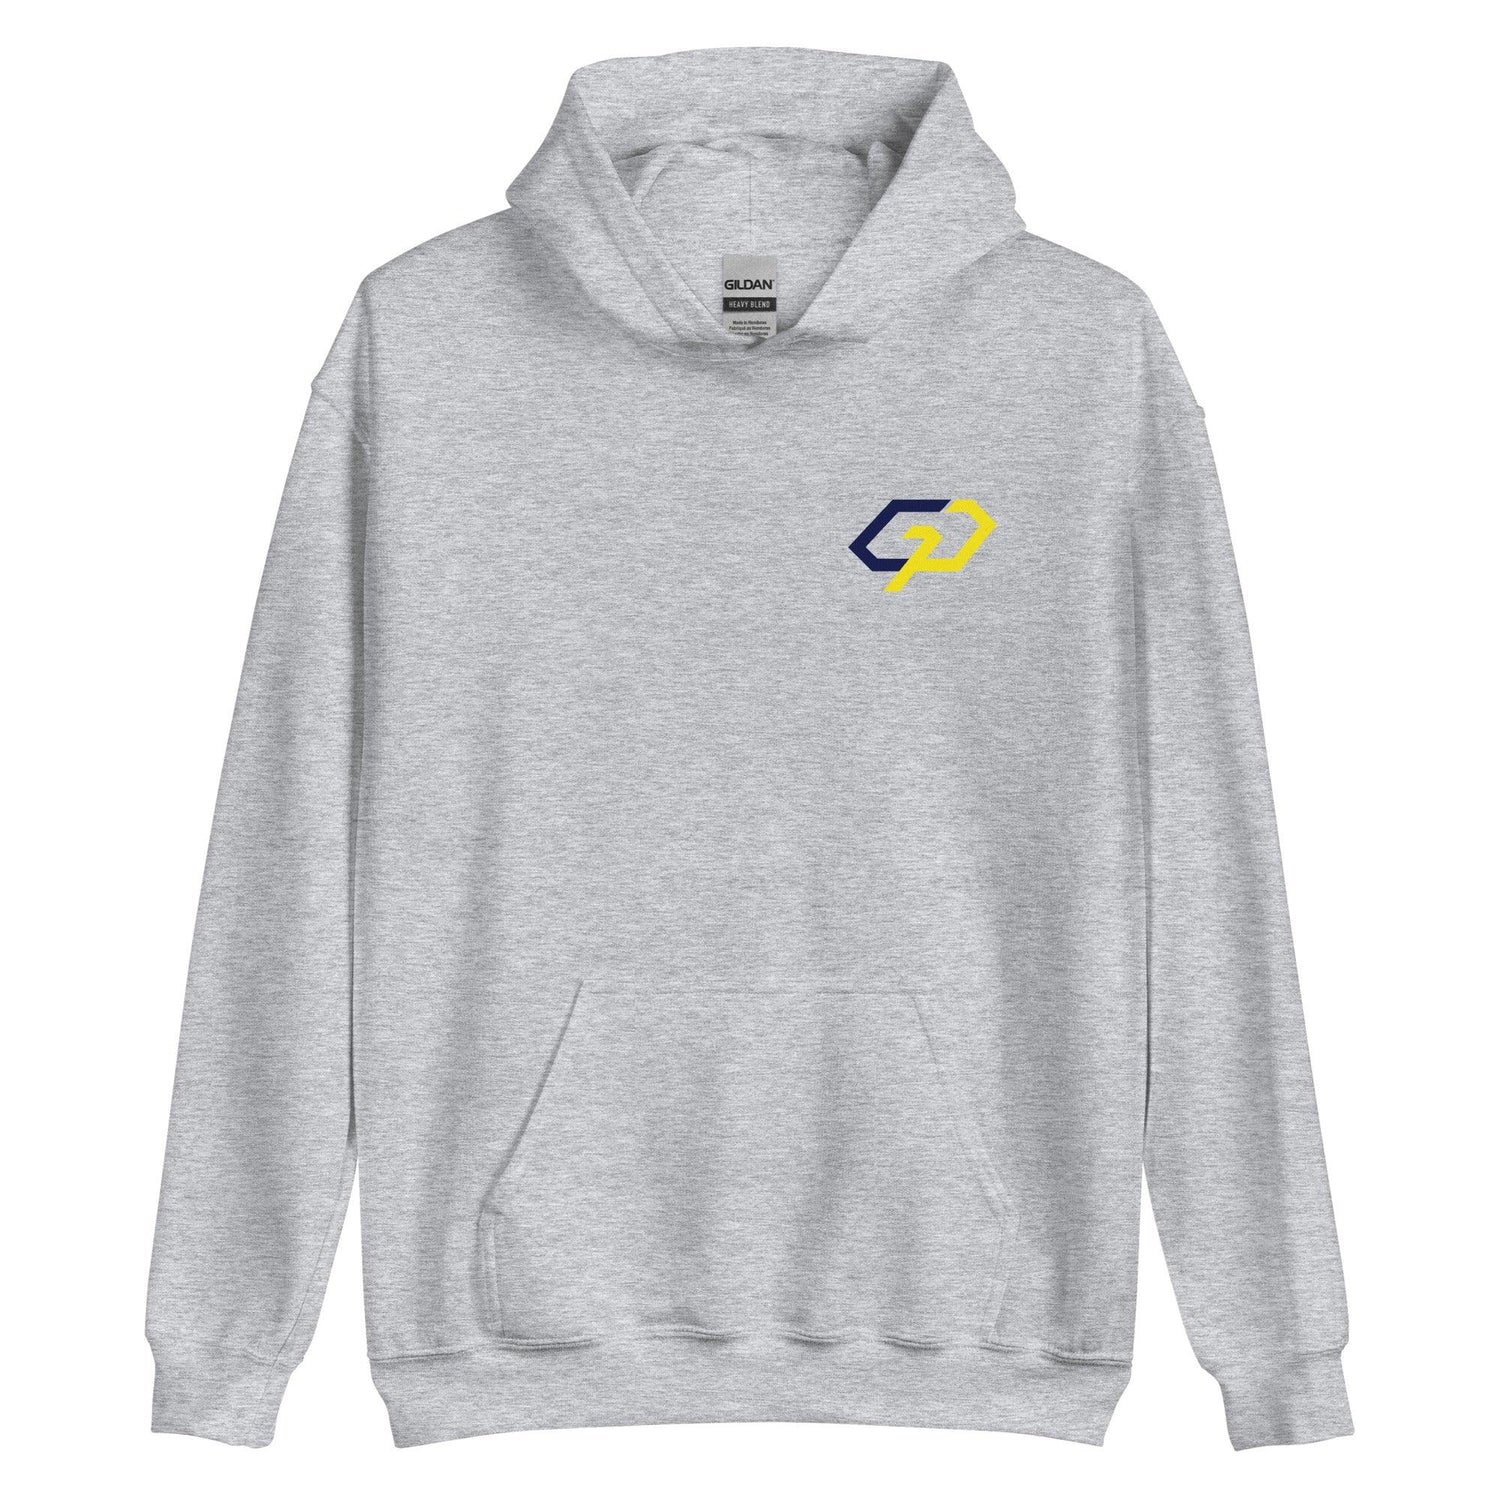 Gregory Pace "Signature" Hoodie - Fan Arch